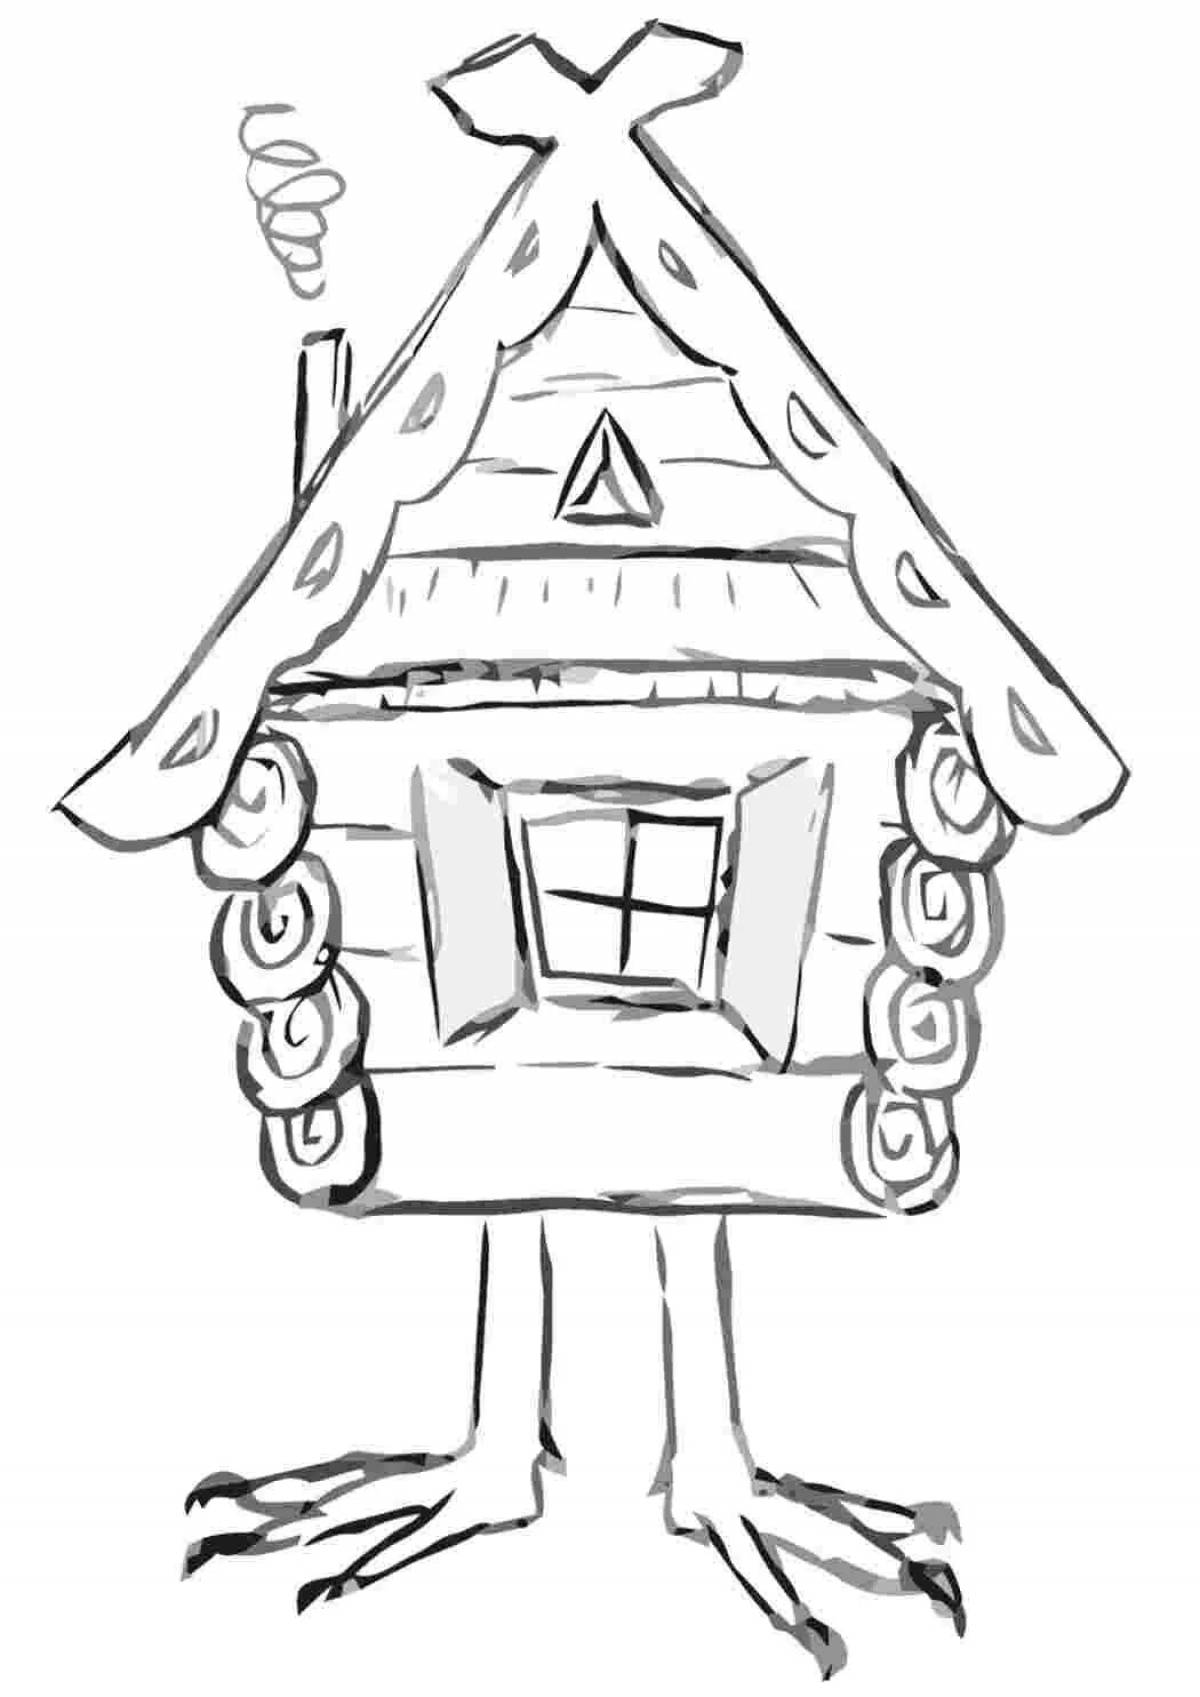 Coloring page friendly hut for kids